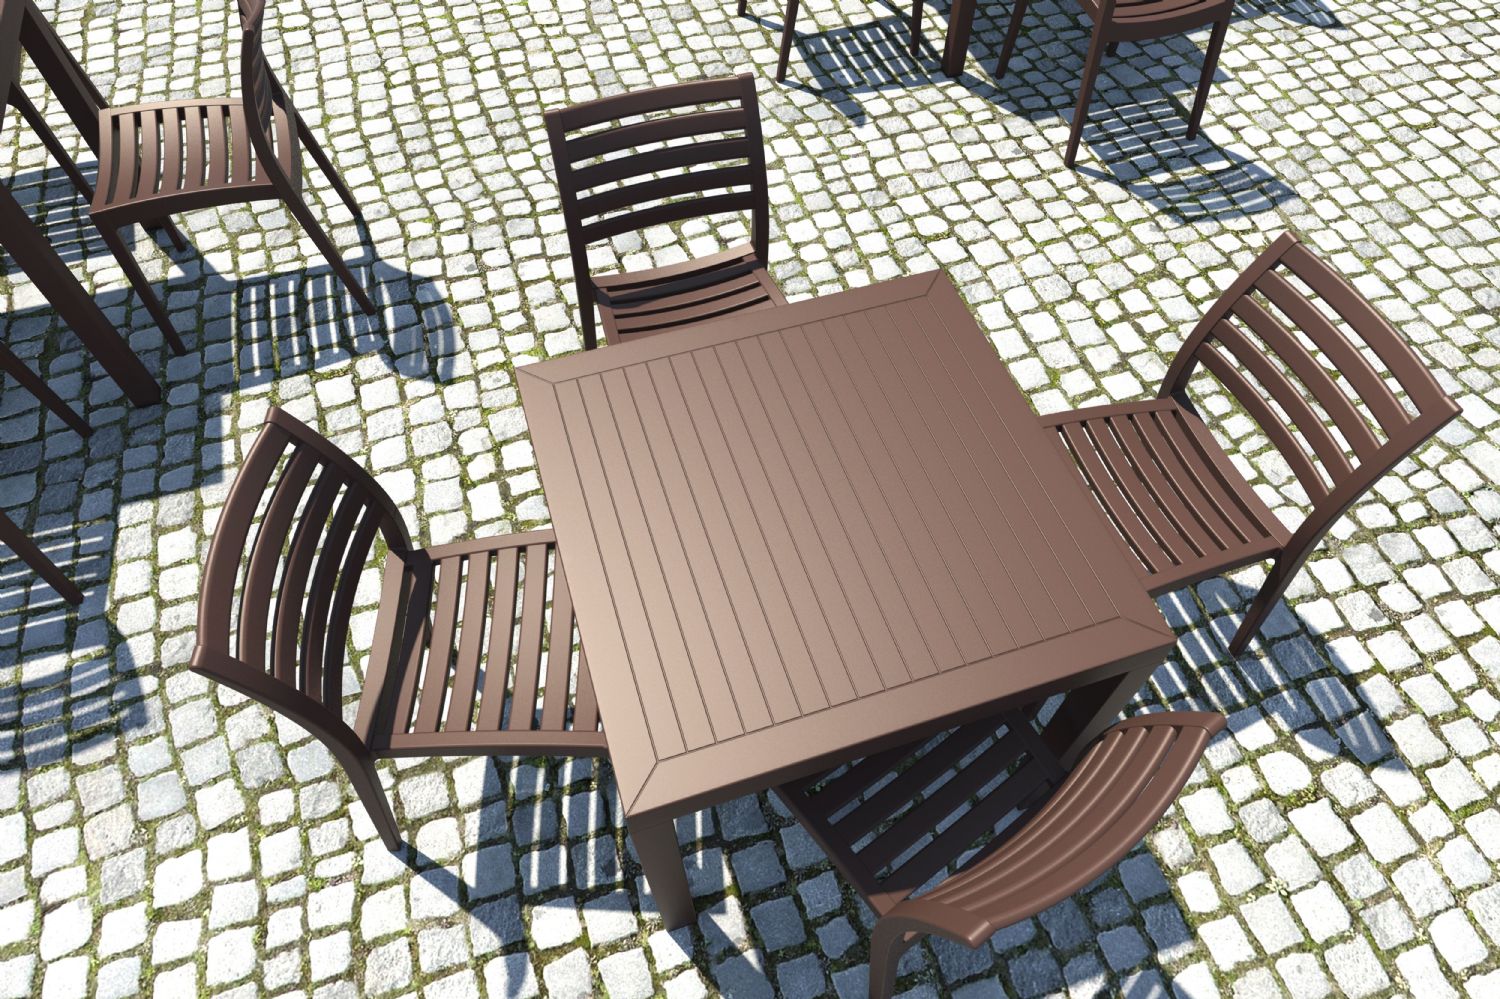 Ares Resin Square Outdoor Dining Set 5 Piece with Side Chairs Taupe ISP1641S-DVR - 5